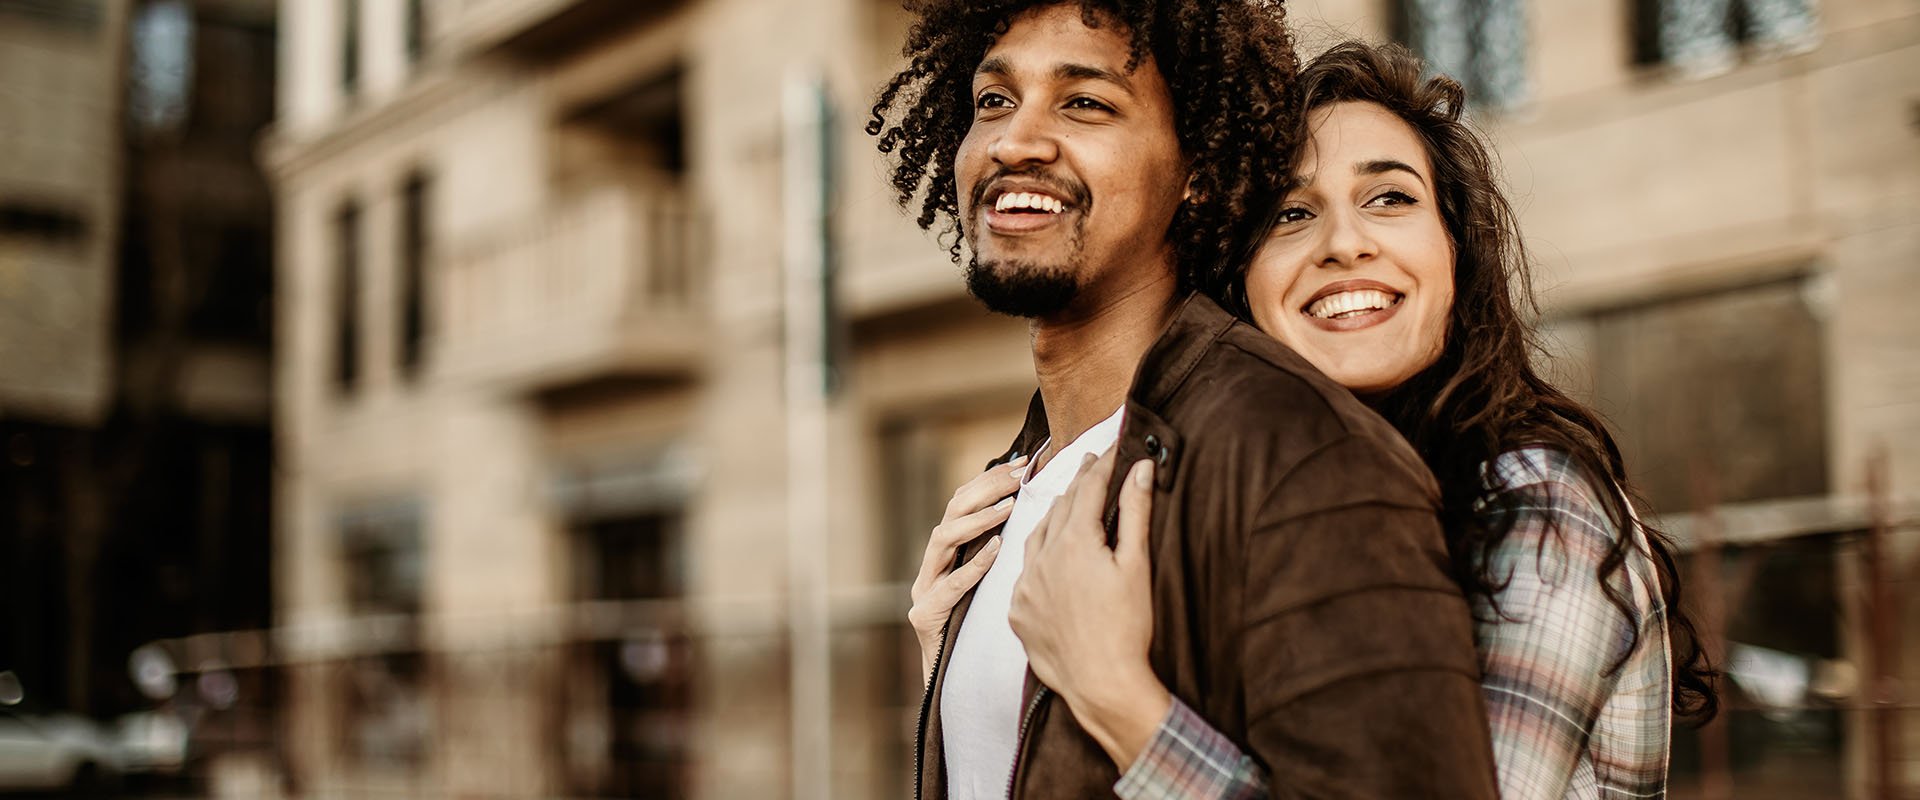 Woman hugging man from behind as a symbol of how to find the right person